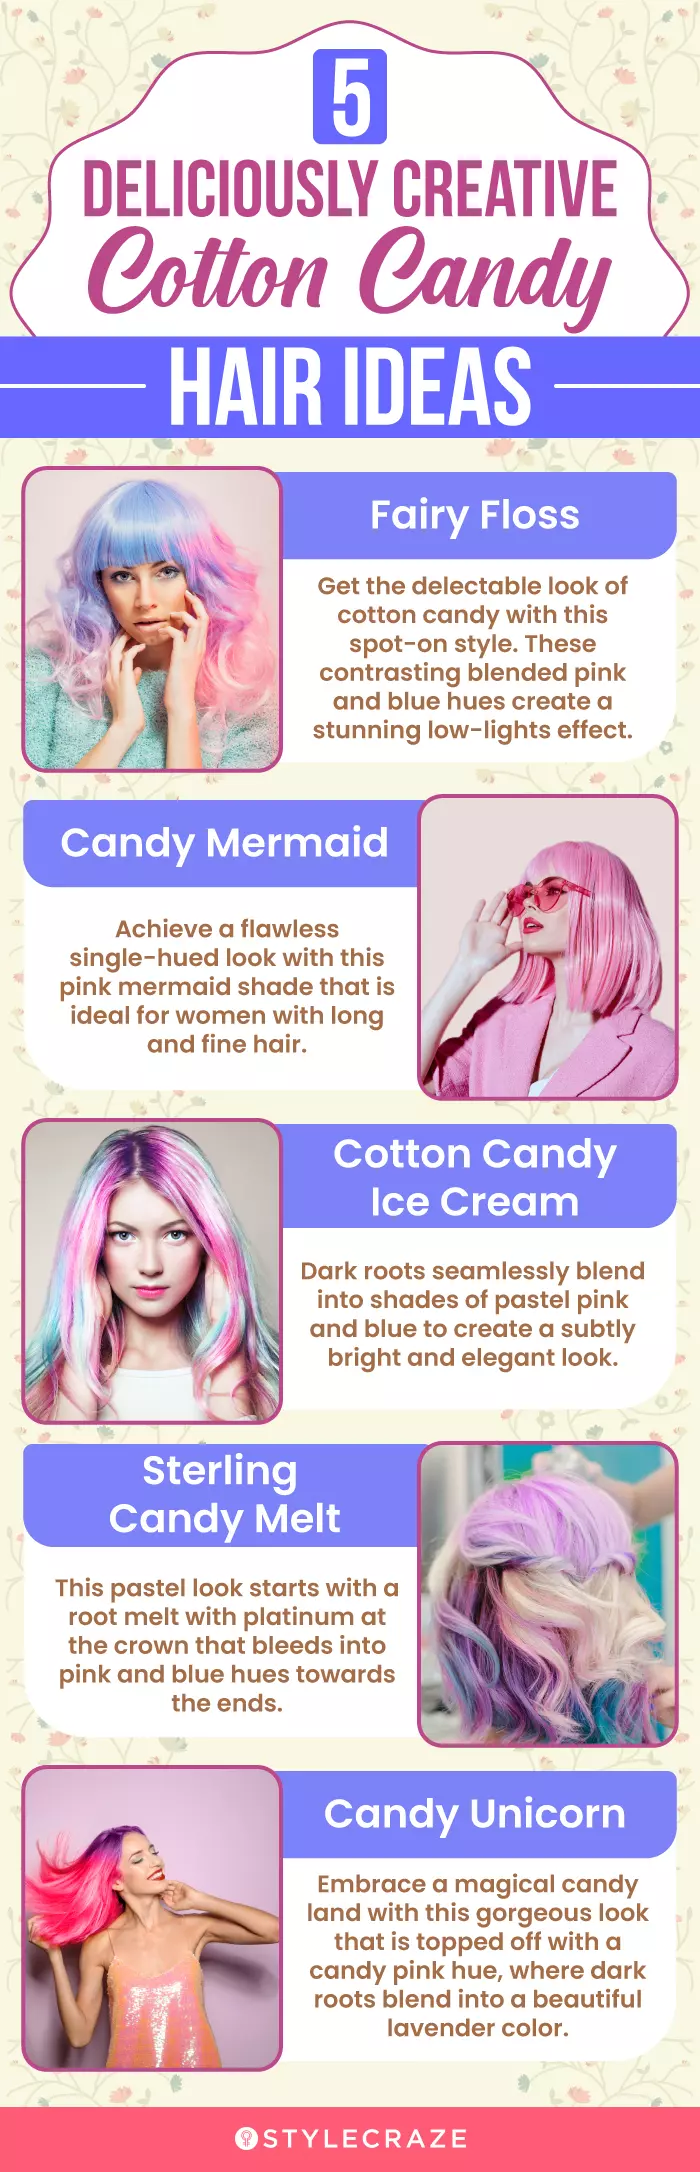 5 deliciously creative cotton candy hair ideas (infographic)